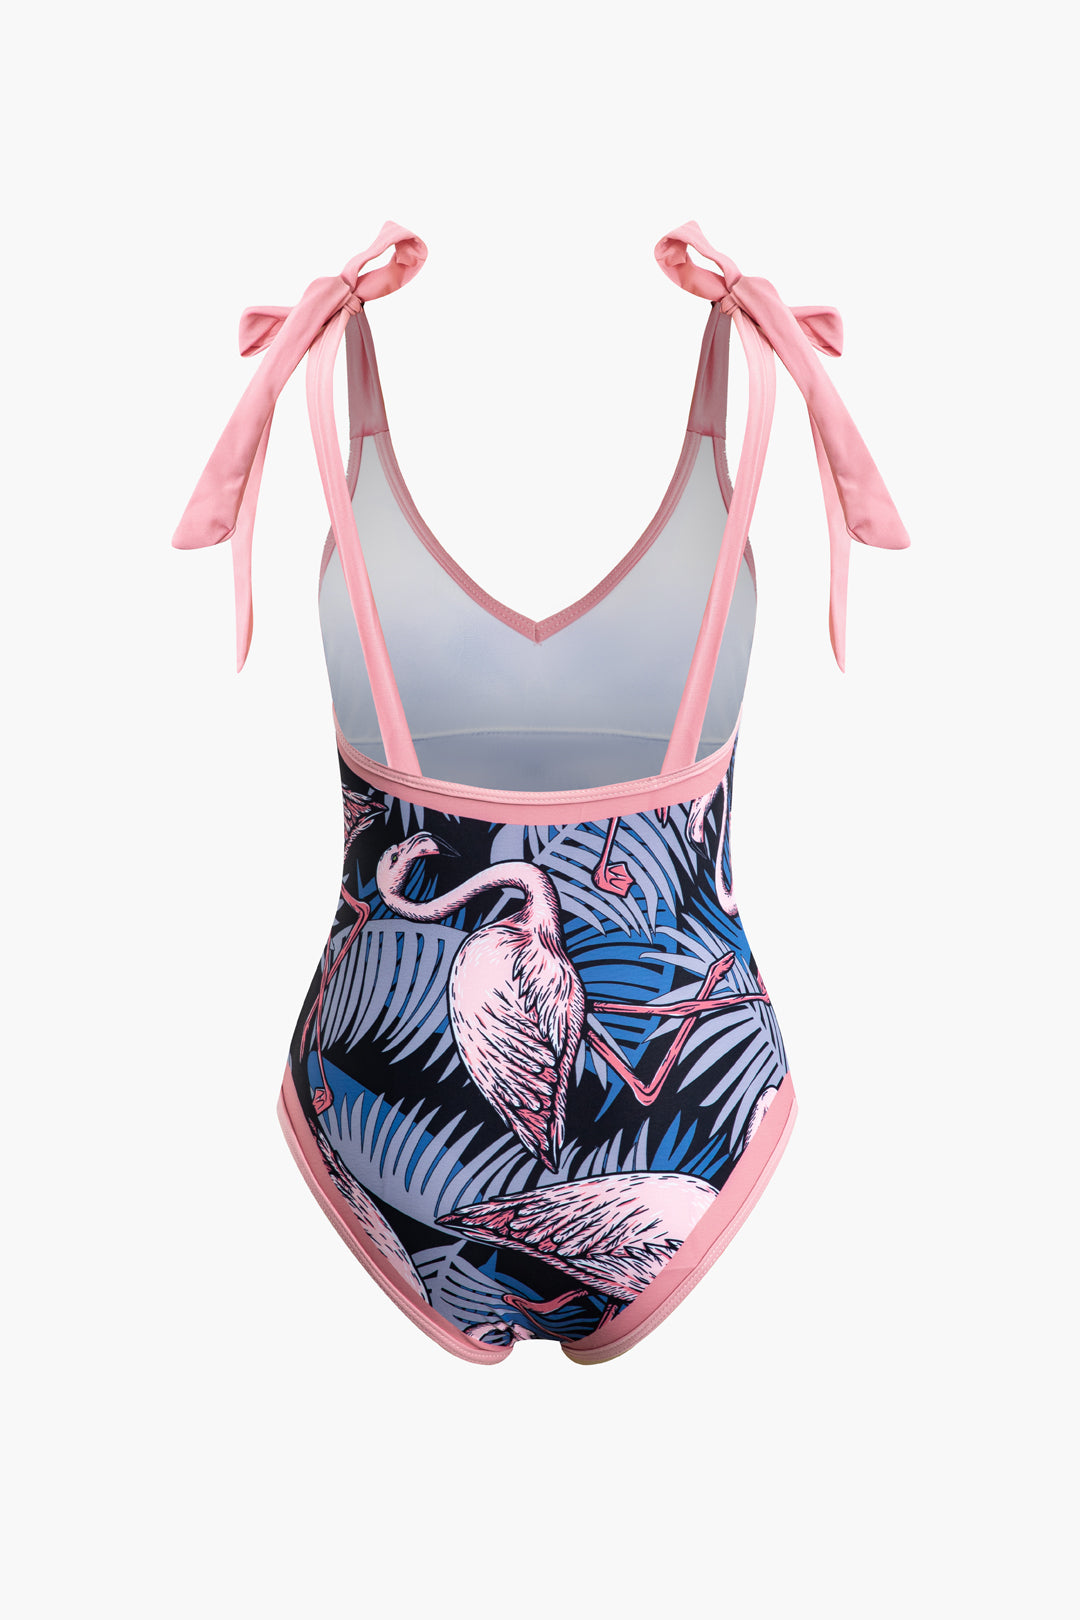 Flamingos Pattern Tie Swimsuit And Knot Sarong Skirt Set